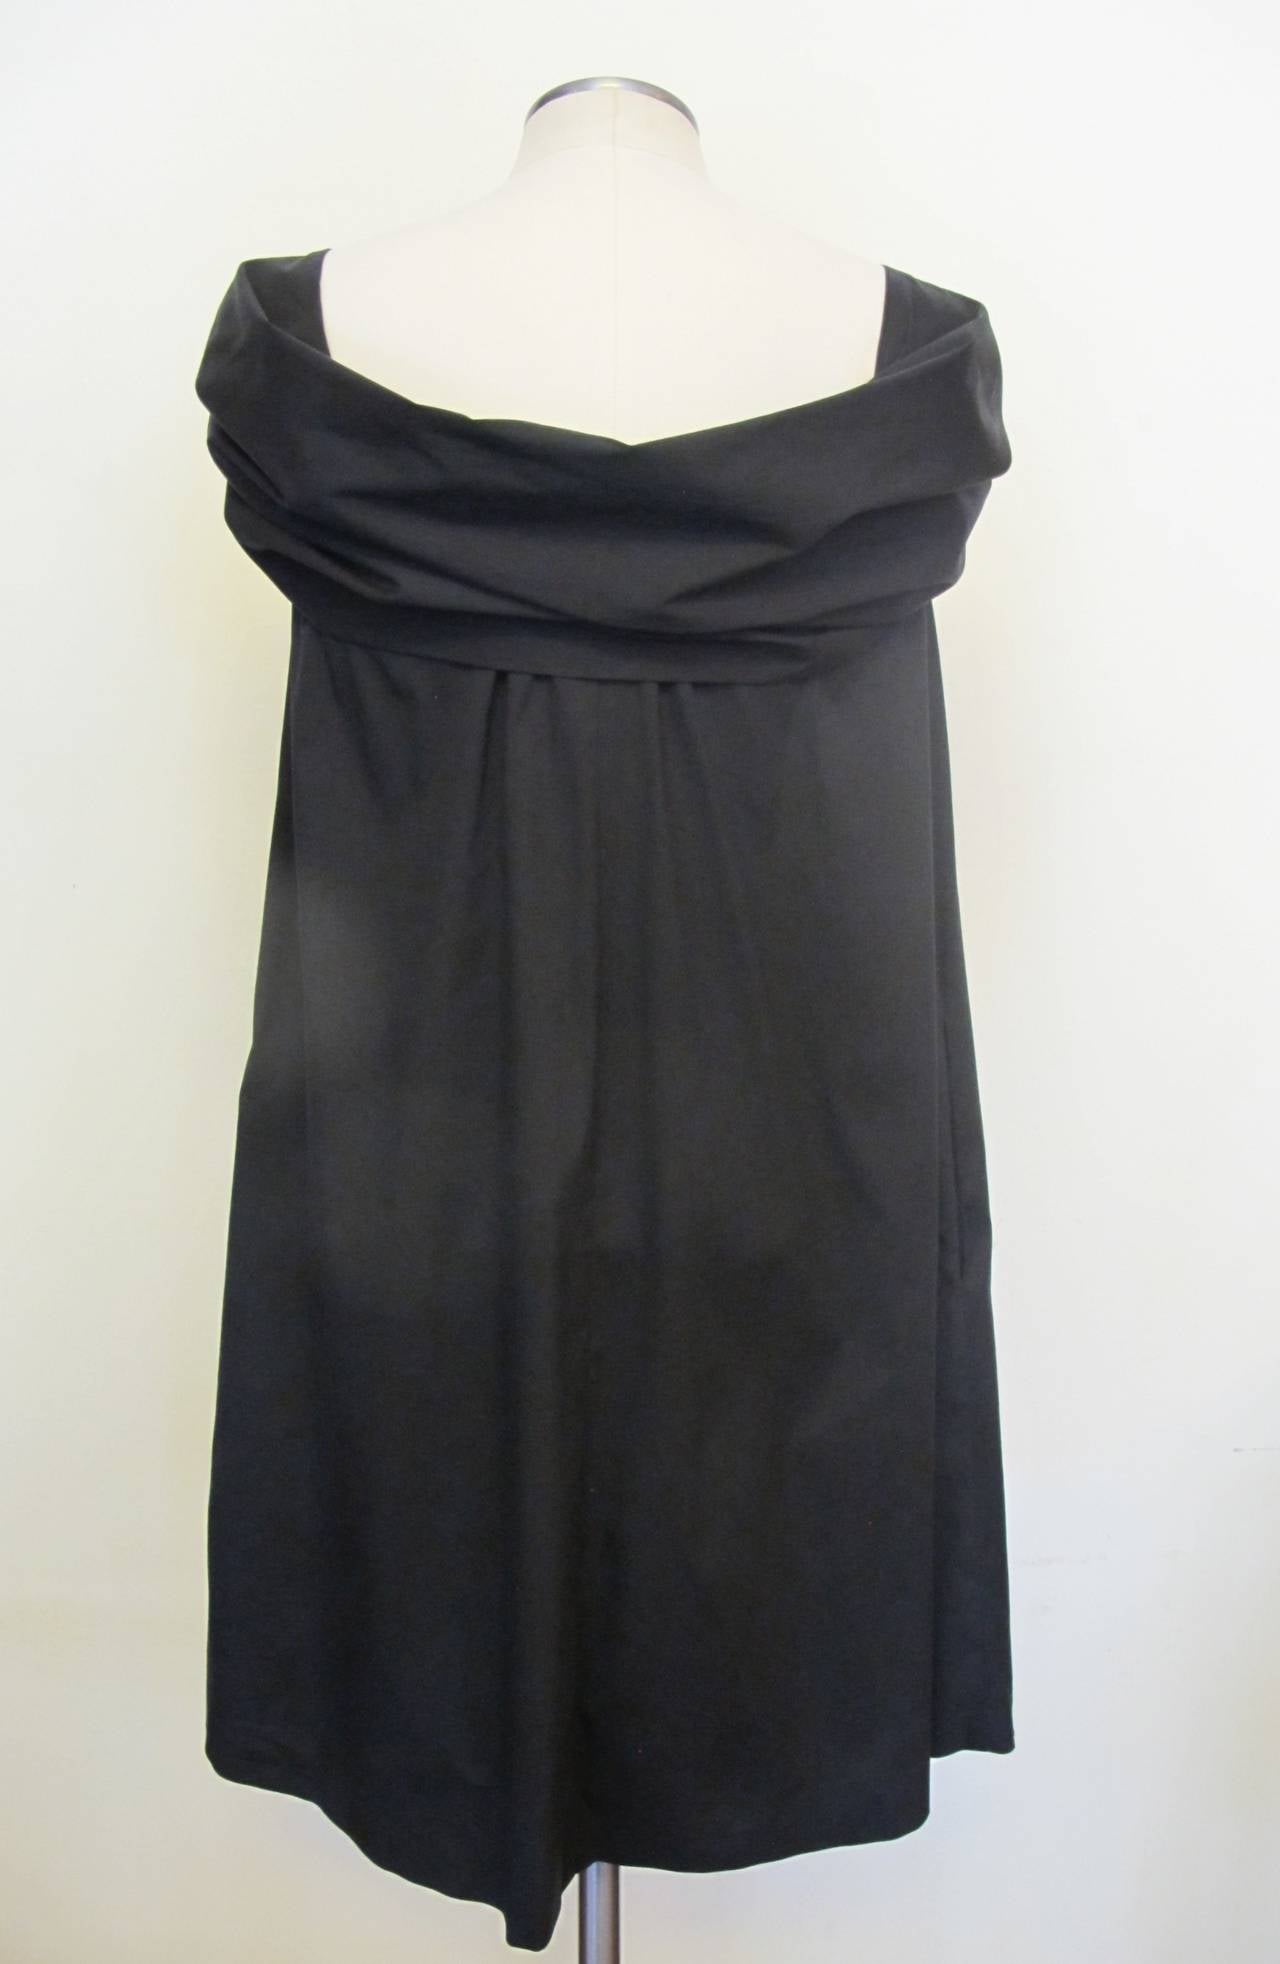 Jean Paul Gaultier Off The Shoulder Black Dress In Excellent Condition For Sale In San Francisco, CA